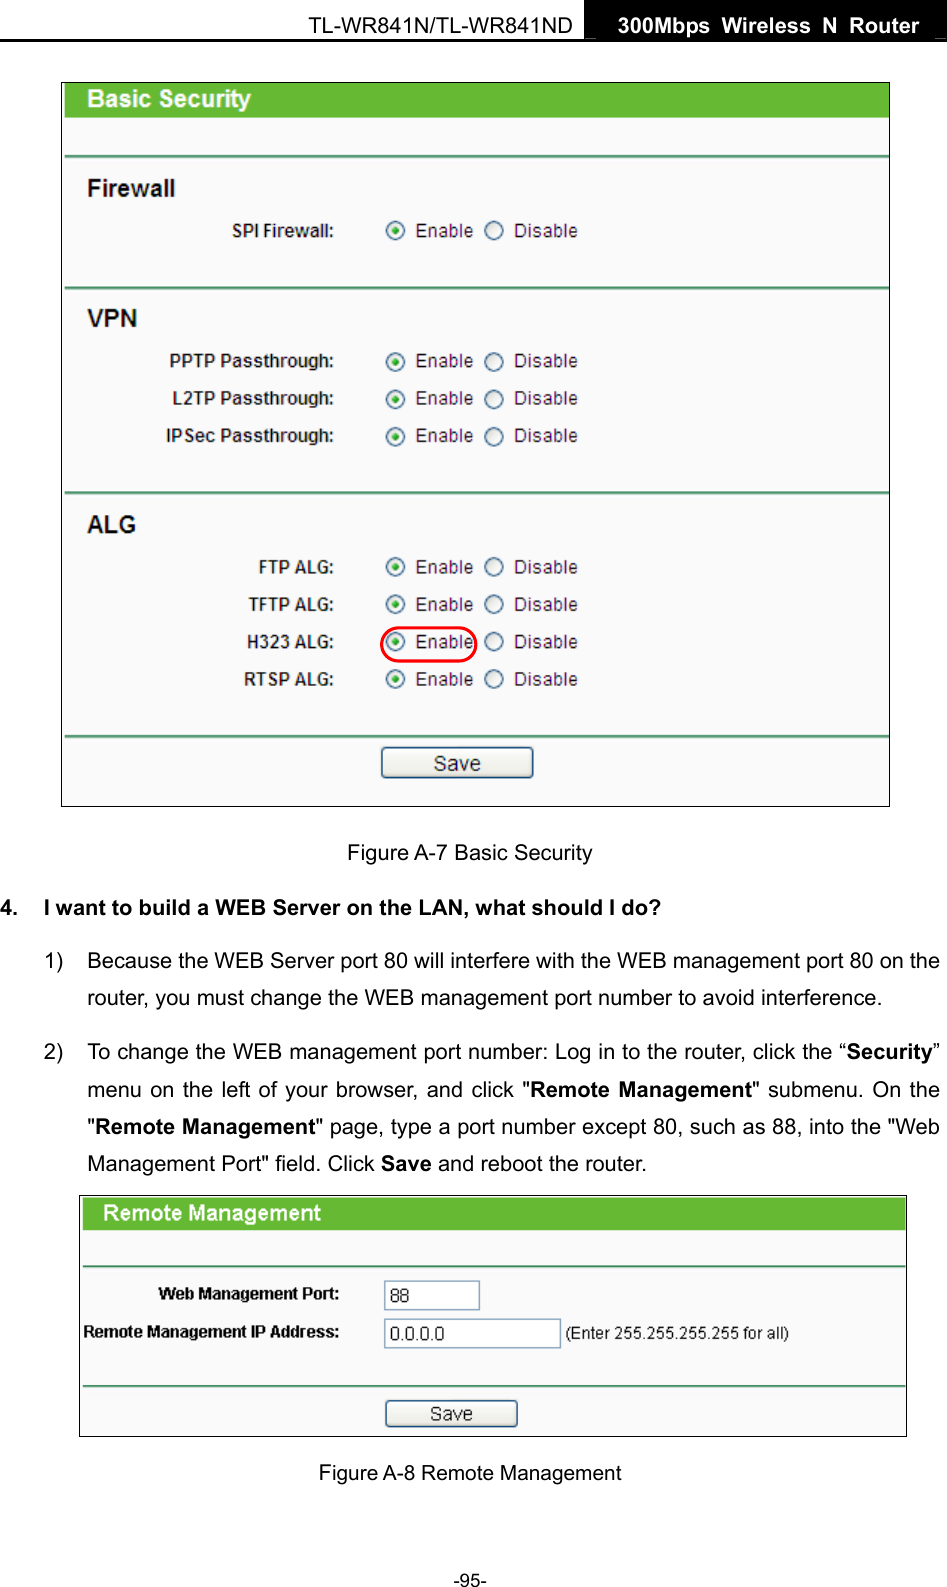   300Mbps Wireless N Router TL-WR841N/TL-WR841ND -95-    Figure A-7 Basic Security 4.  I want to build a WEB Server on the LAN, what should I do? 1)  Because the WEB Server port 80 will interfere with the WEB management port 80 on the router, you must change the WEB management port number to avoid interference. 2)  To change the WEB management port number: Log in to the router, click the “Security” menu on the left of your browser, and click &quot;Remote Management&quot; submenu. On the &quot;Remote Management&quot; page, type a port number except 80, such as 88, into the &quot;Web Management Port&quot; field. Click Save and reboot the router.  Figure A-8 Remote Management 